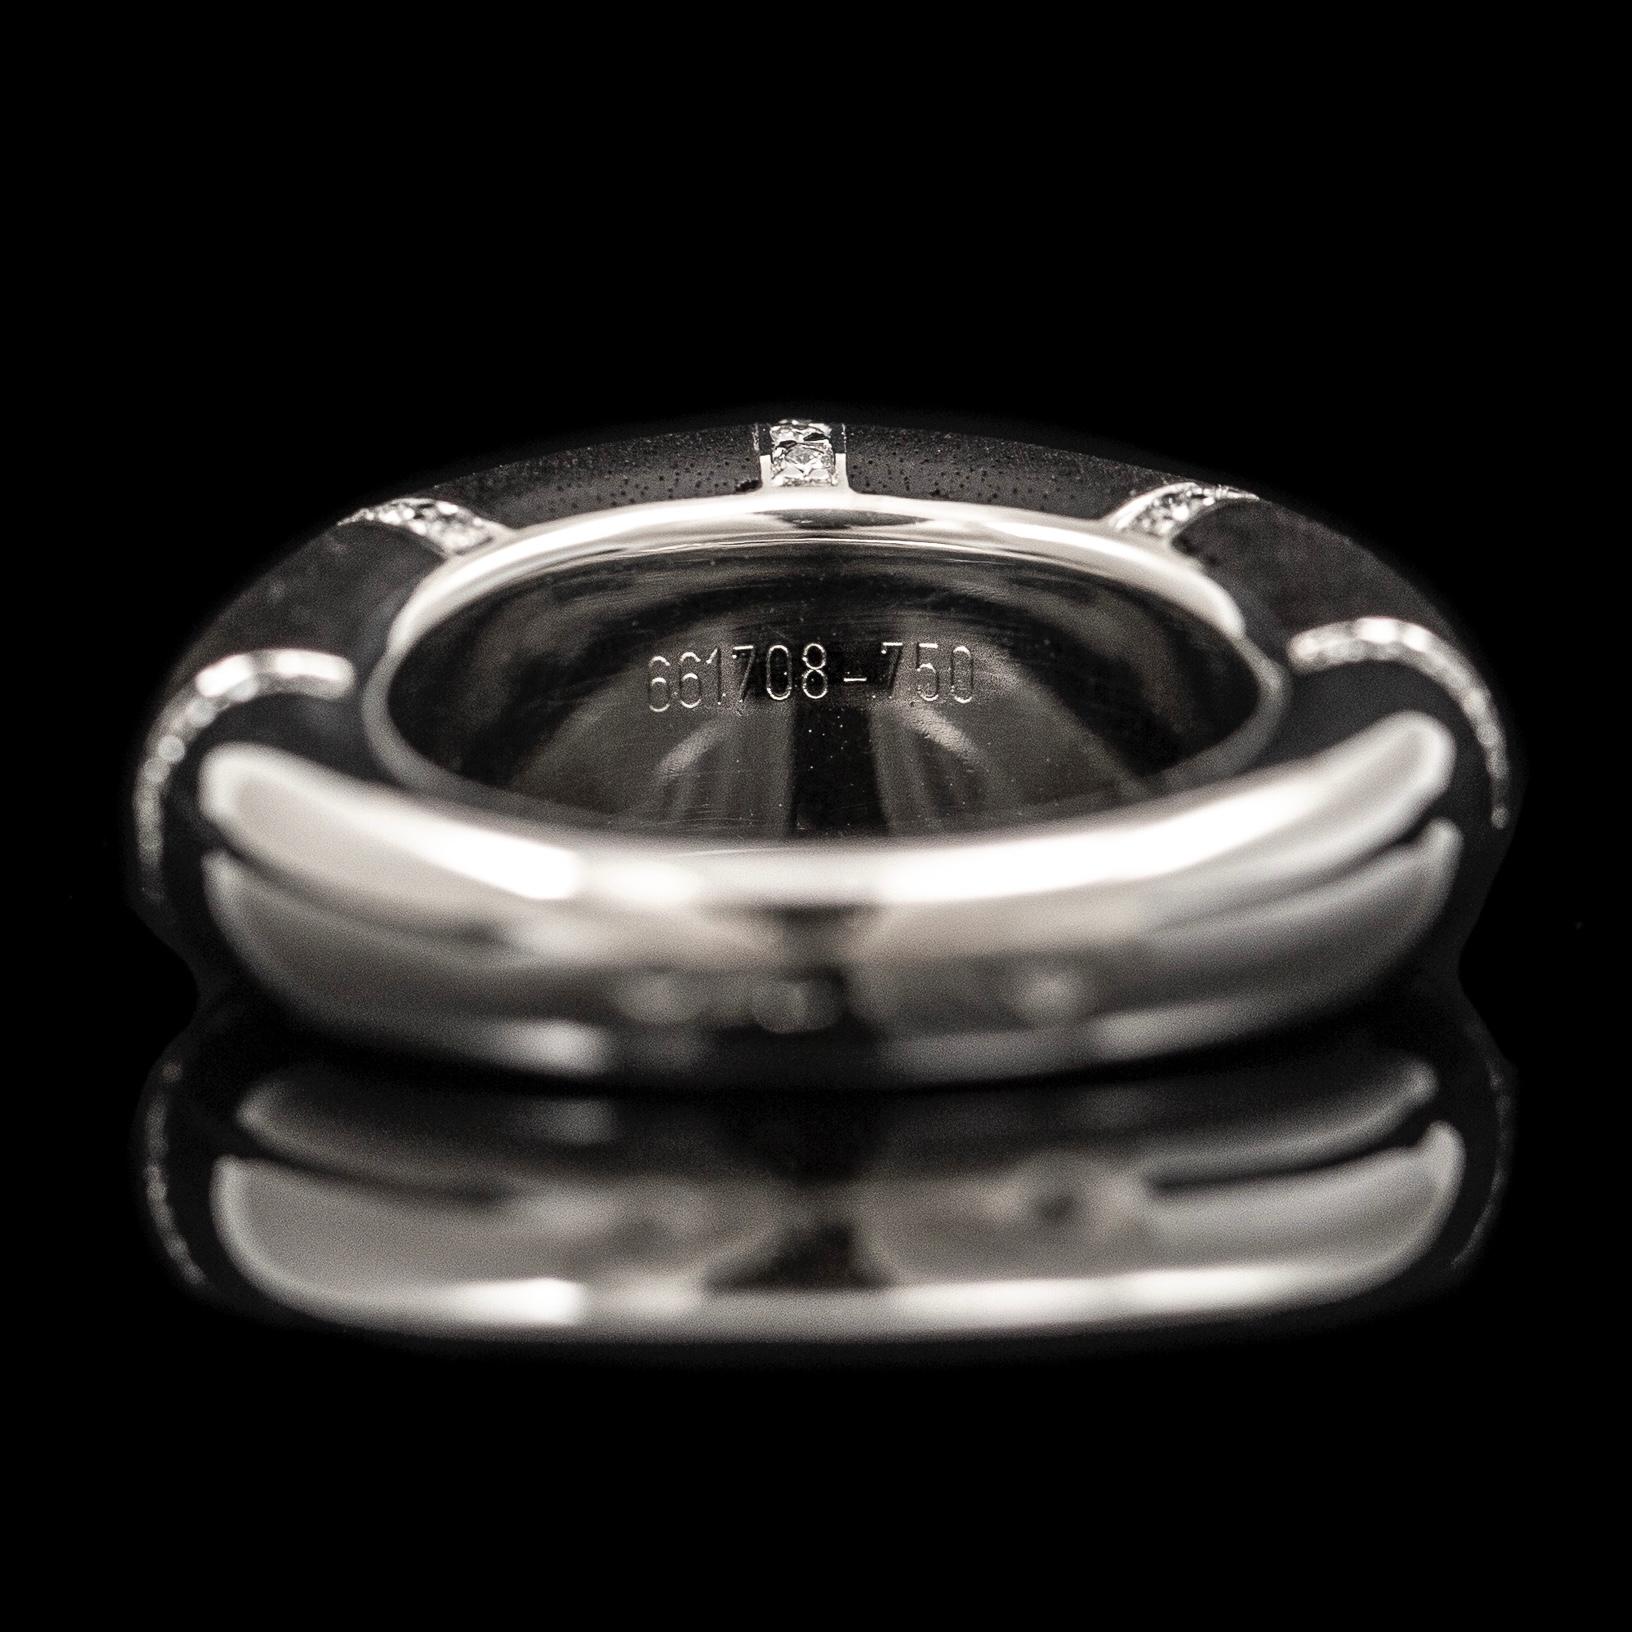 Women's or Men's Chaumet Anneau Diamond Black Ebony Cocktail Ring 18k White Gold French 1990s For Sale